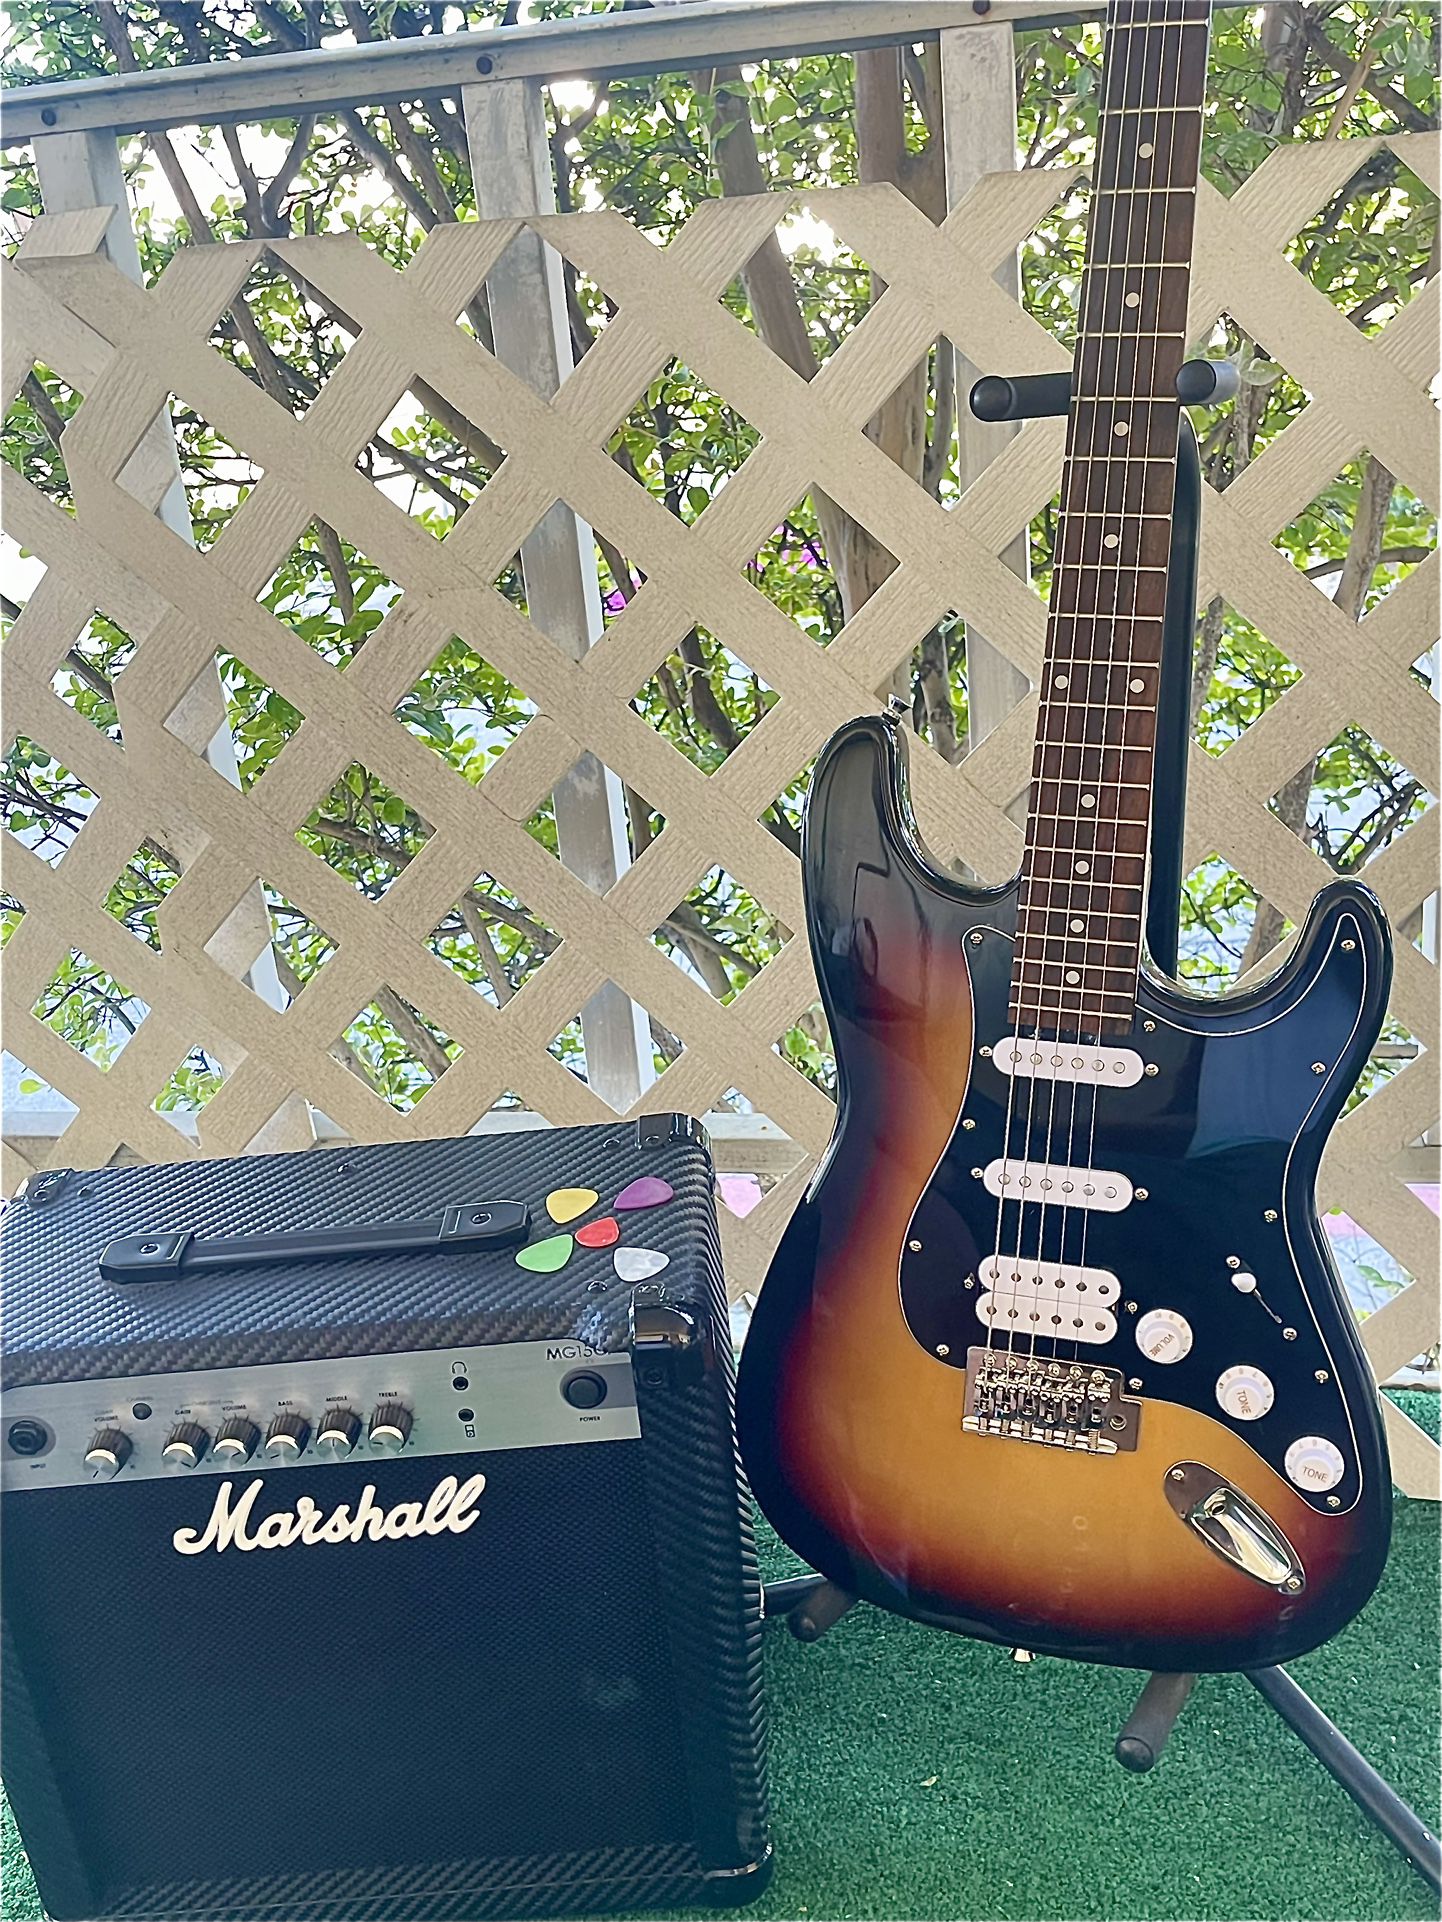 Indio Stratocaster & Marshall Amplifier  $89  